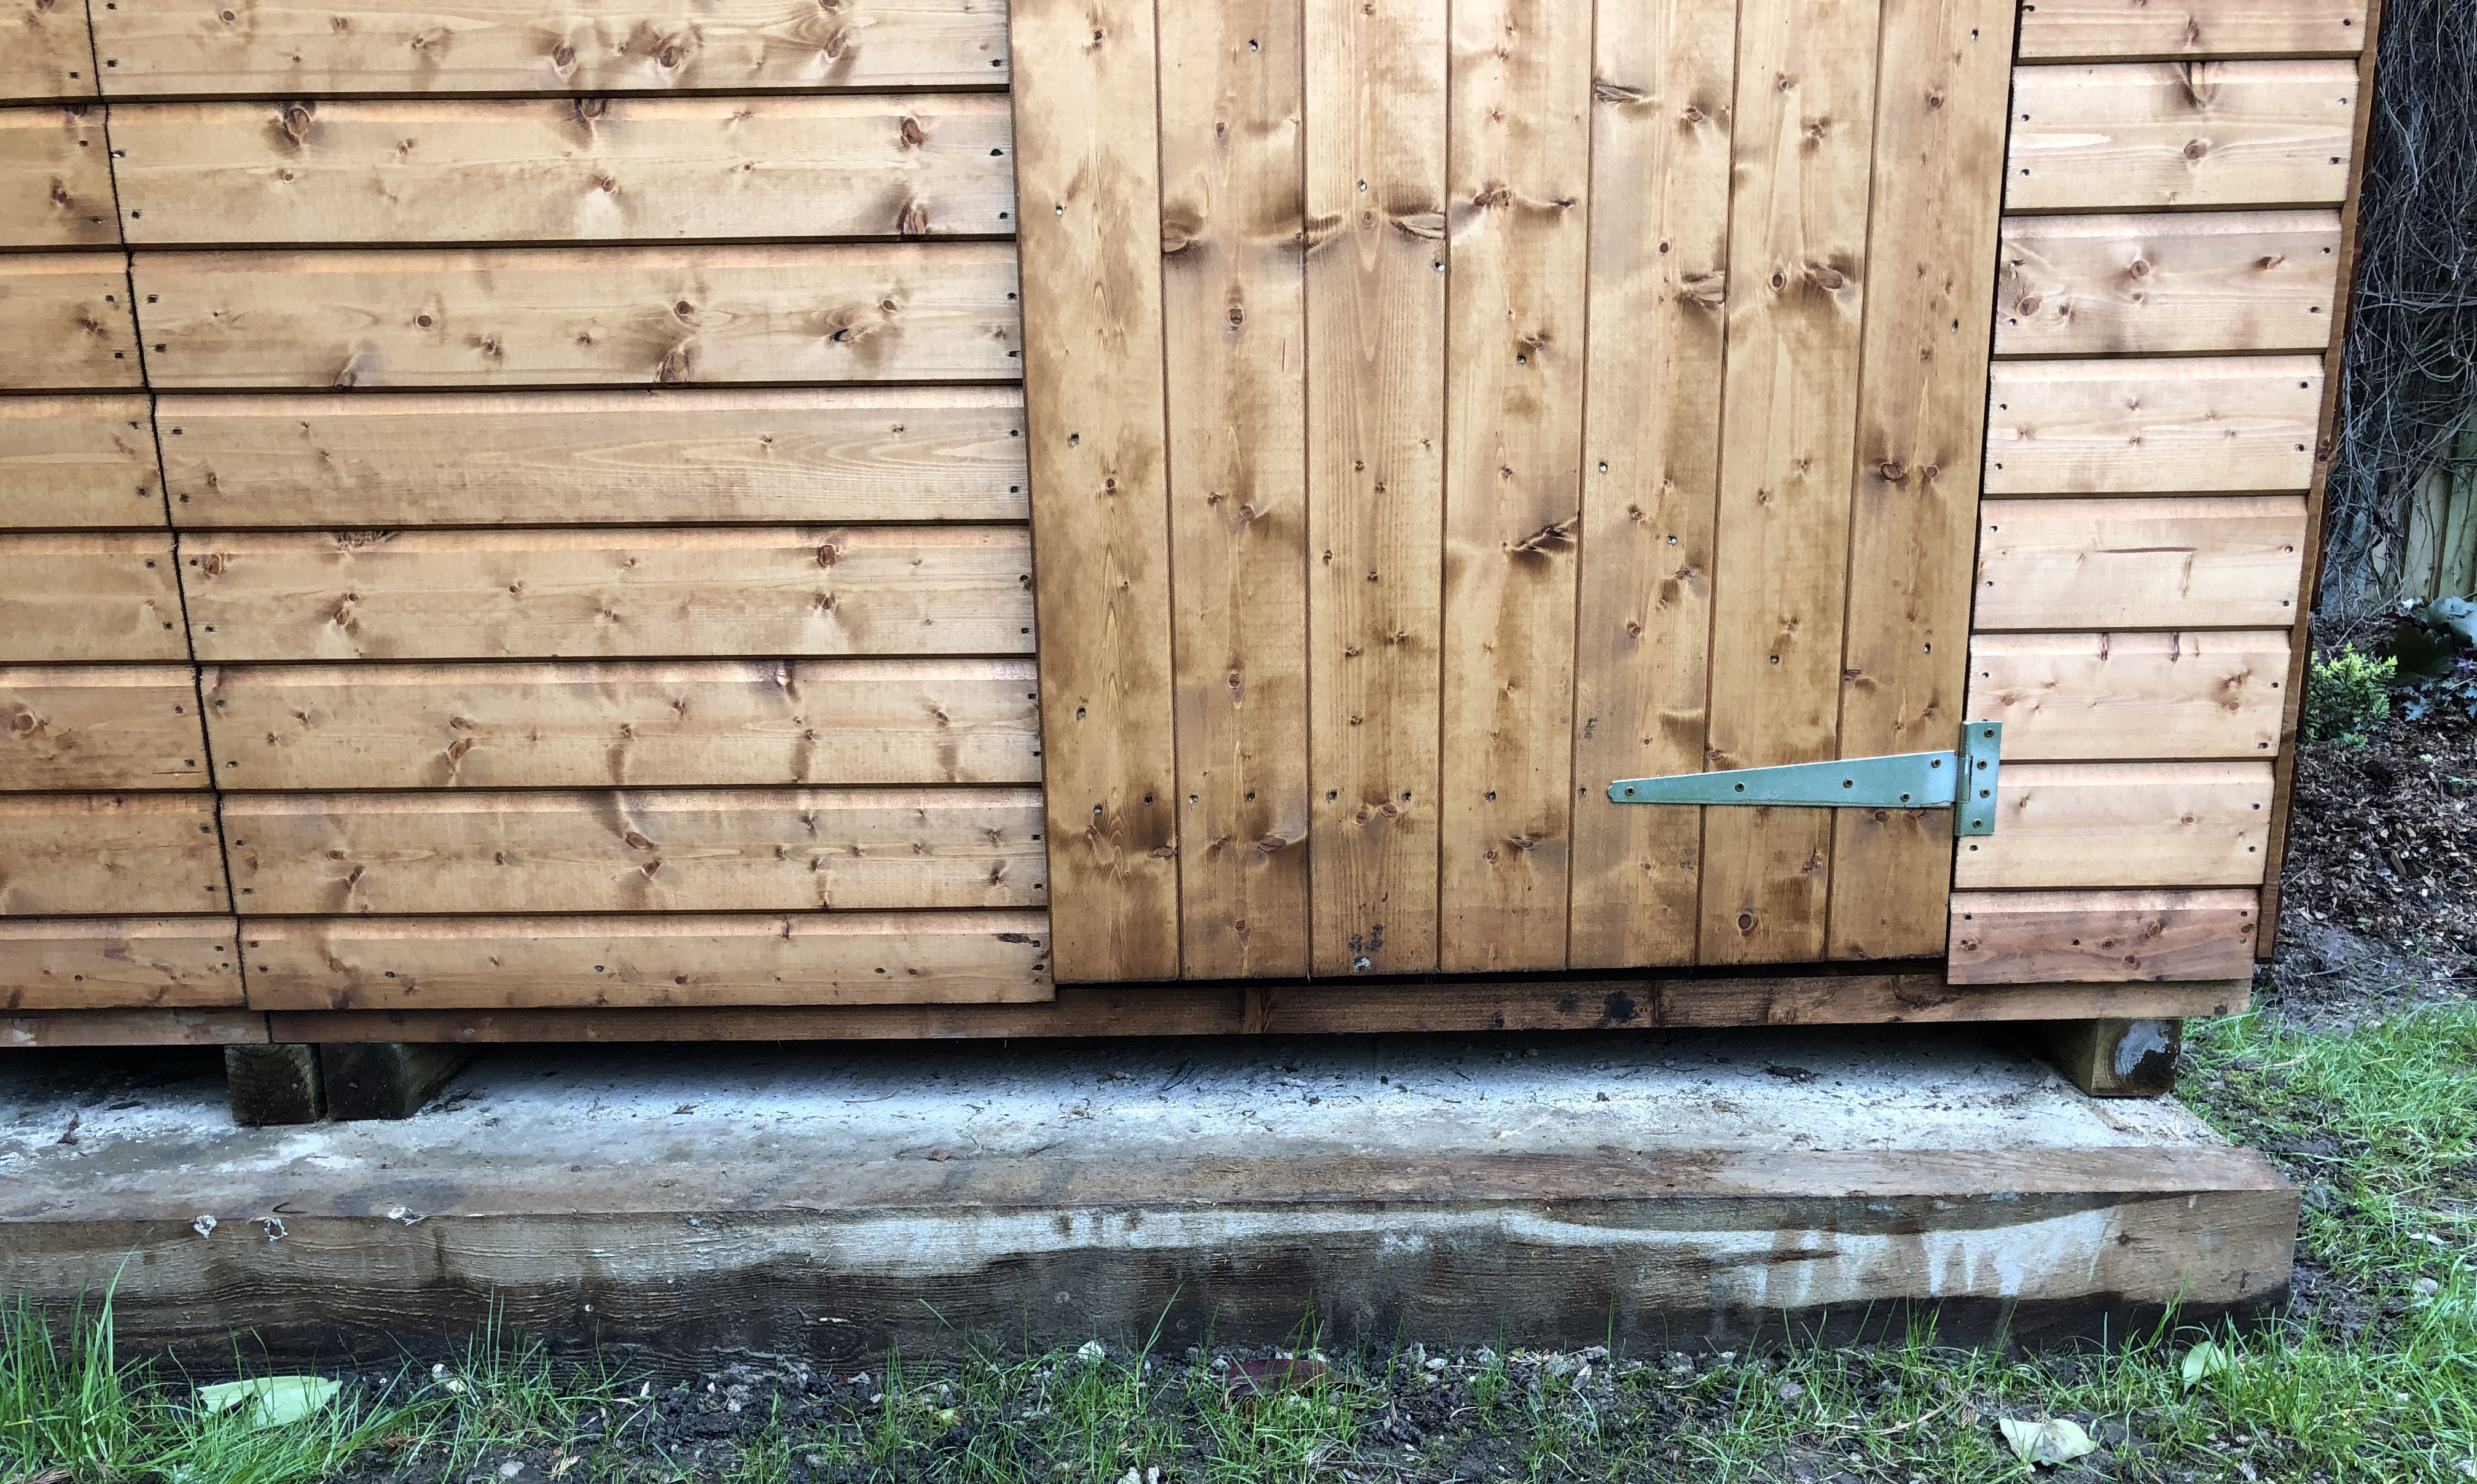 lower front section of a wooden shed on a concrete foundation